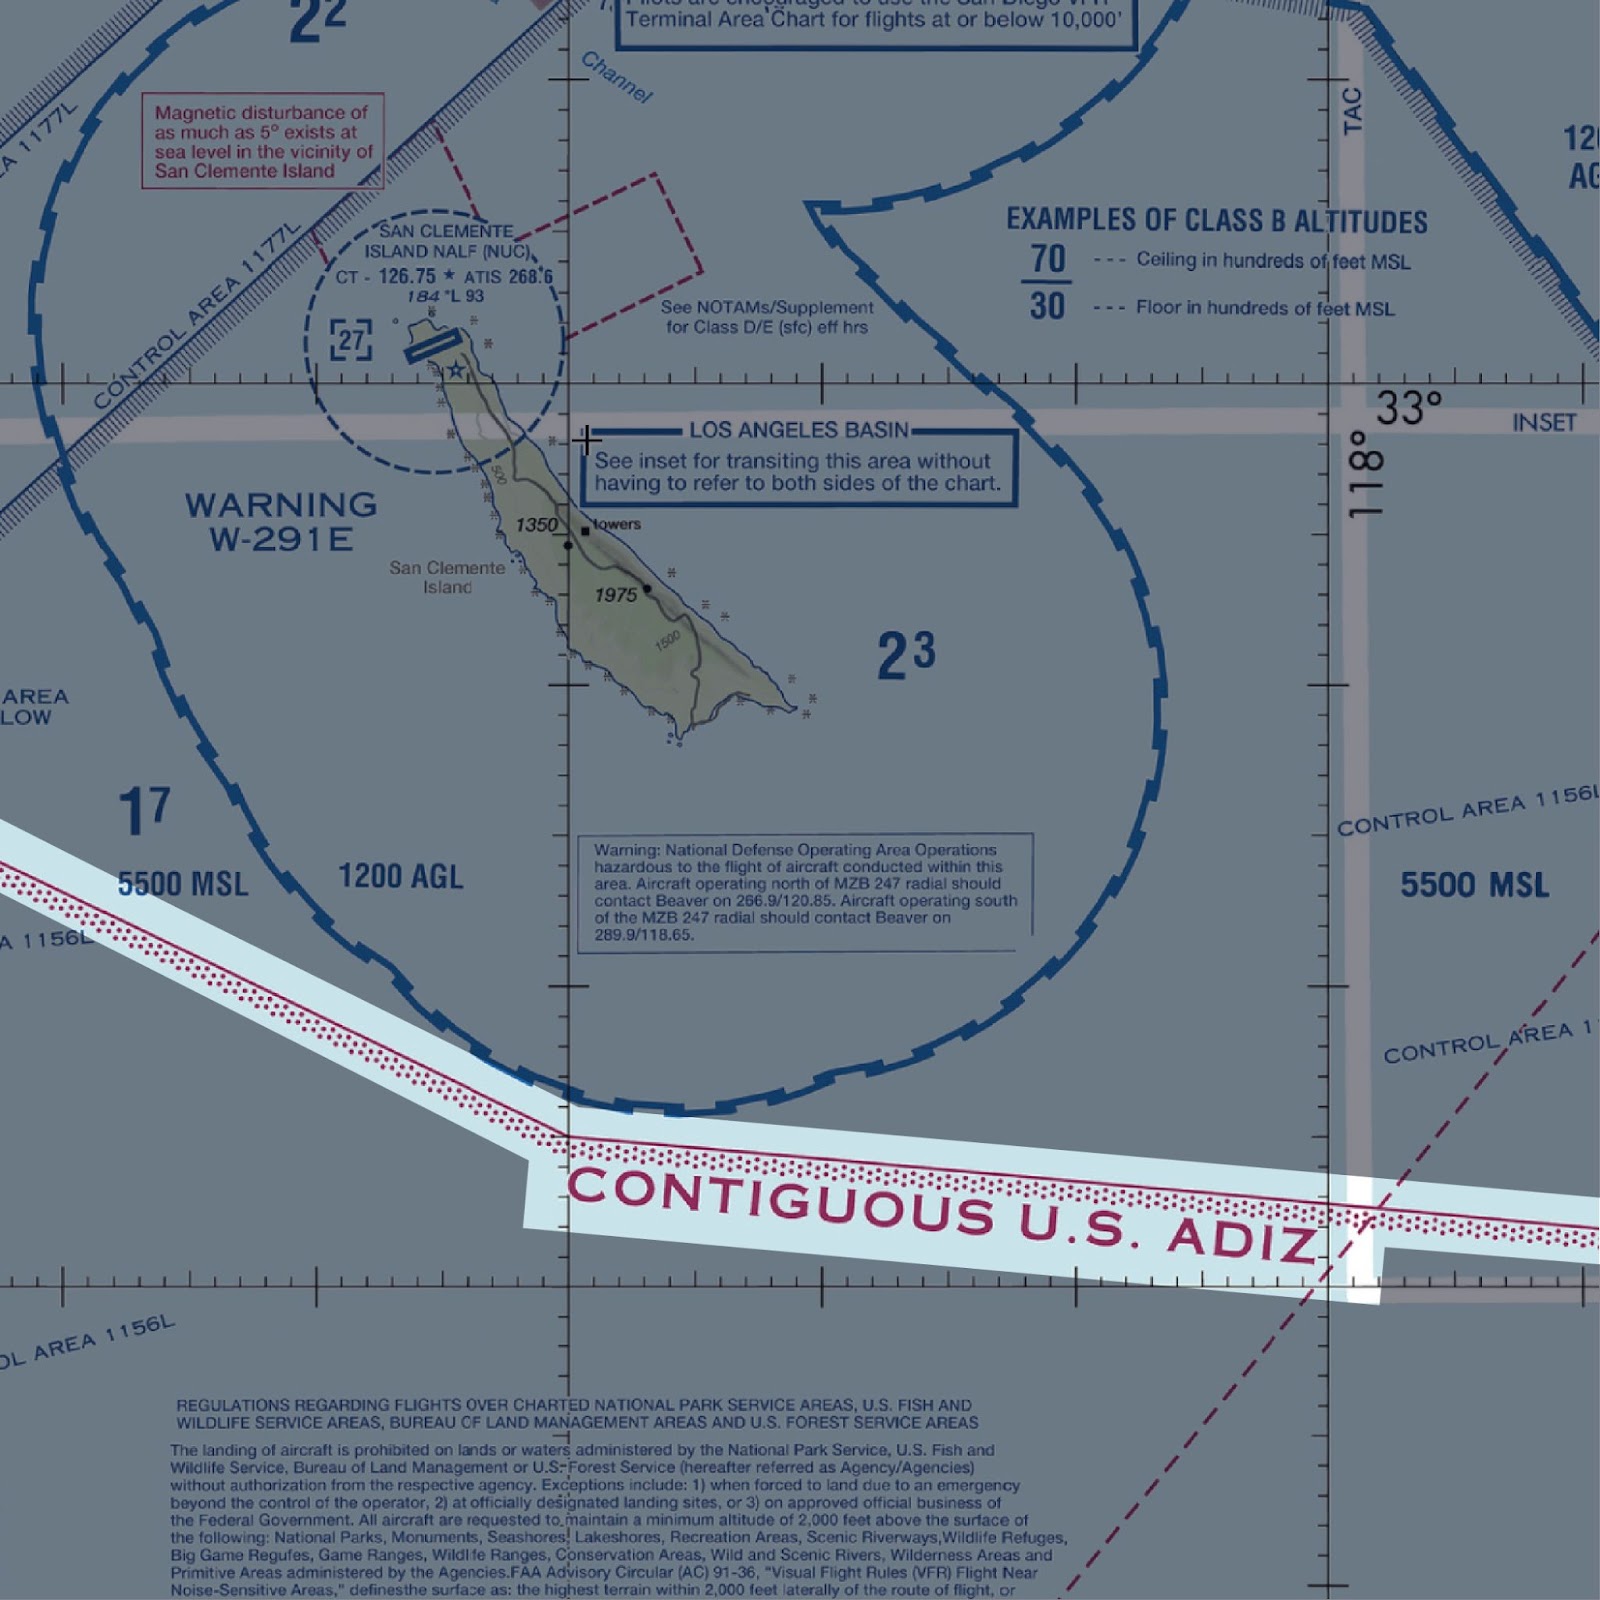 A diagram depicting the Air Defence Identification Zone (ADIZ) on a sectional chart.